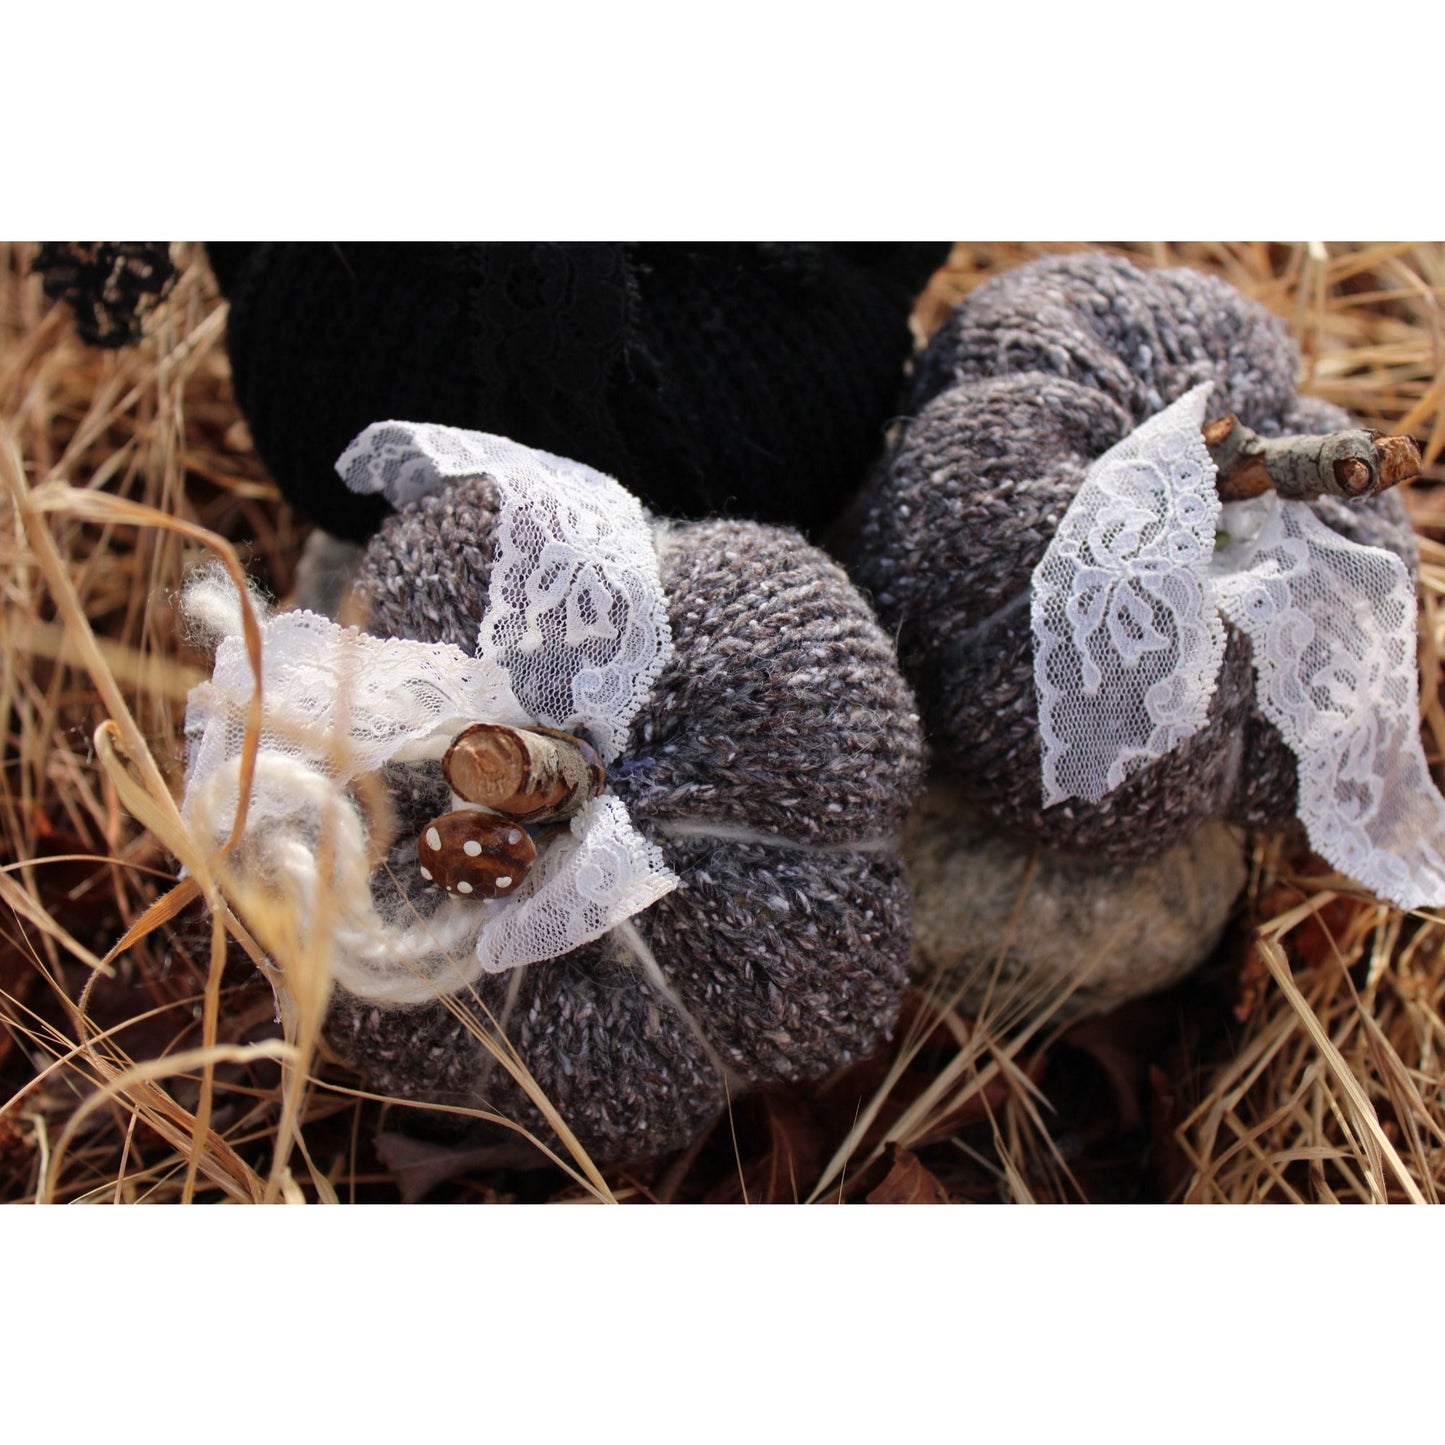 Mini Knit Pumpkin Pillow Pouf in Gray with Vintage Lace, Toadstools, and Wooden Stem